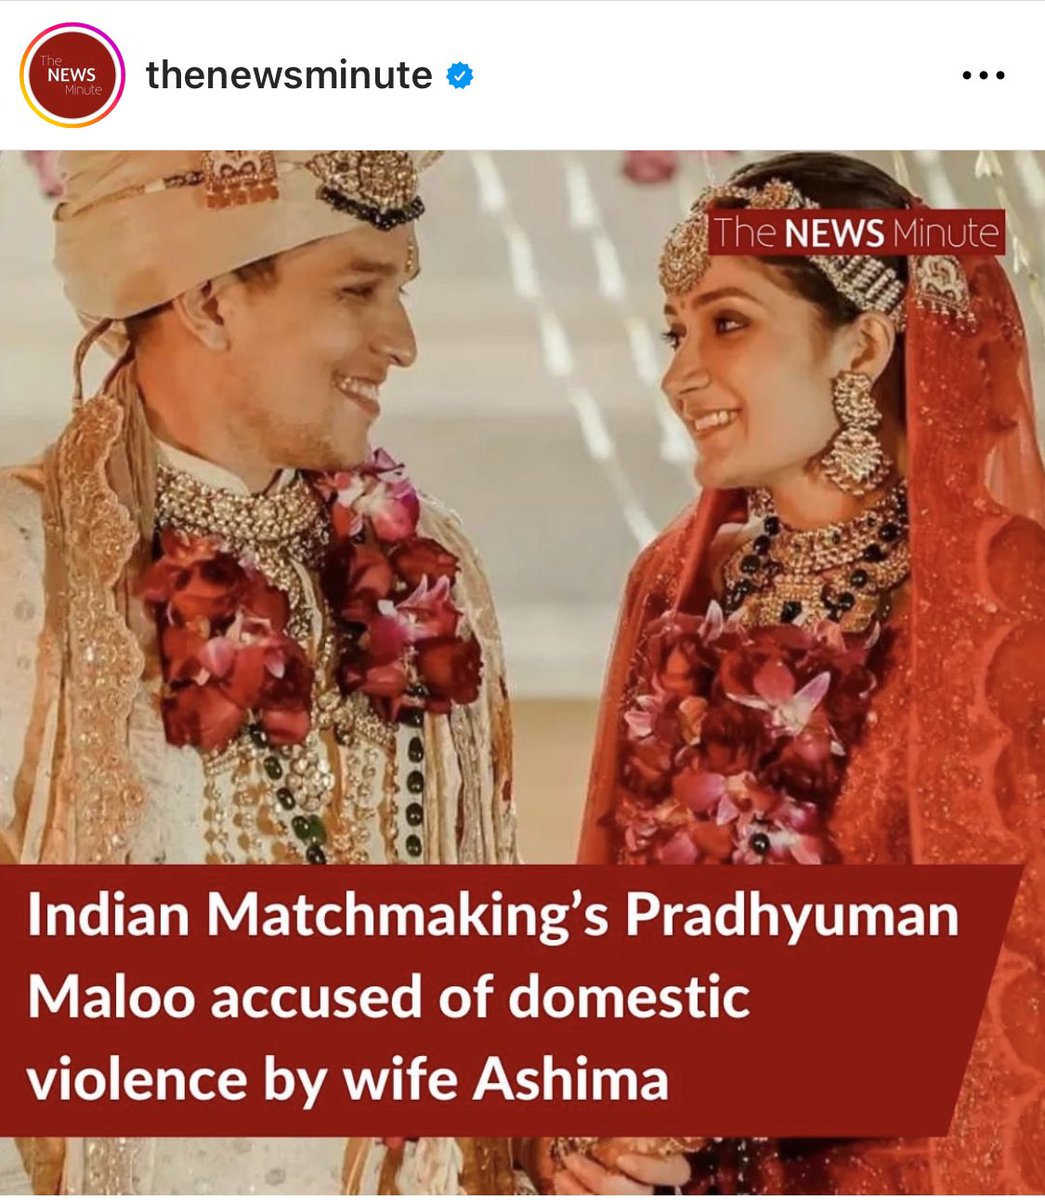 Matchmaking in hell… #IndianMatchmaking